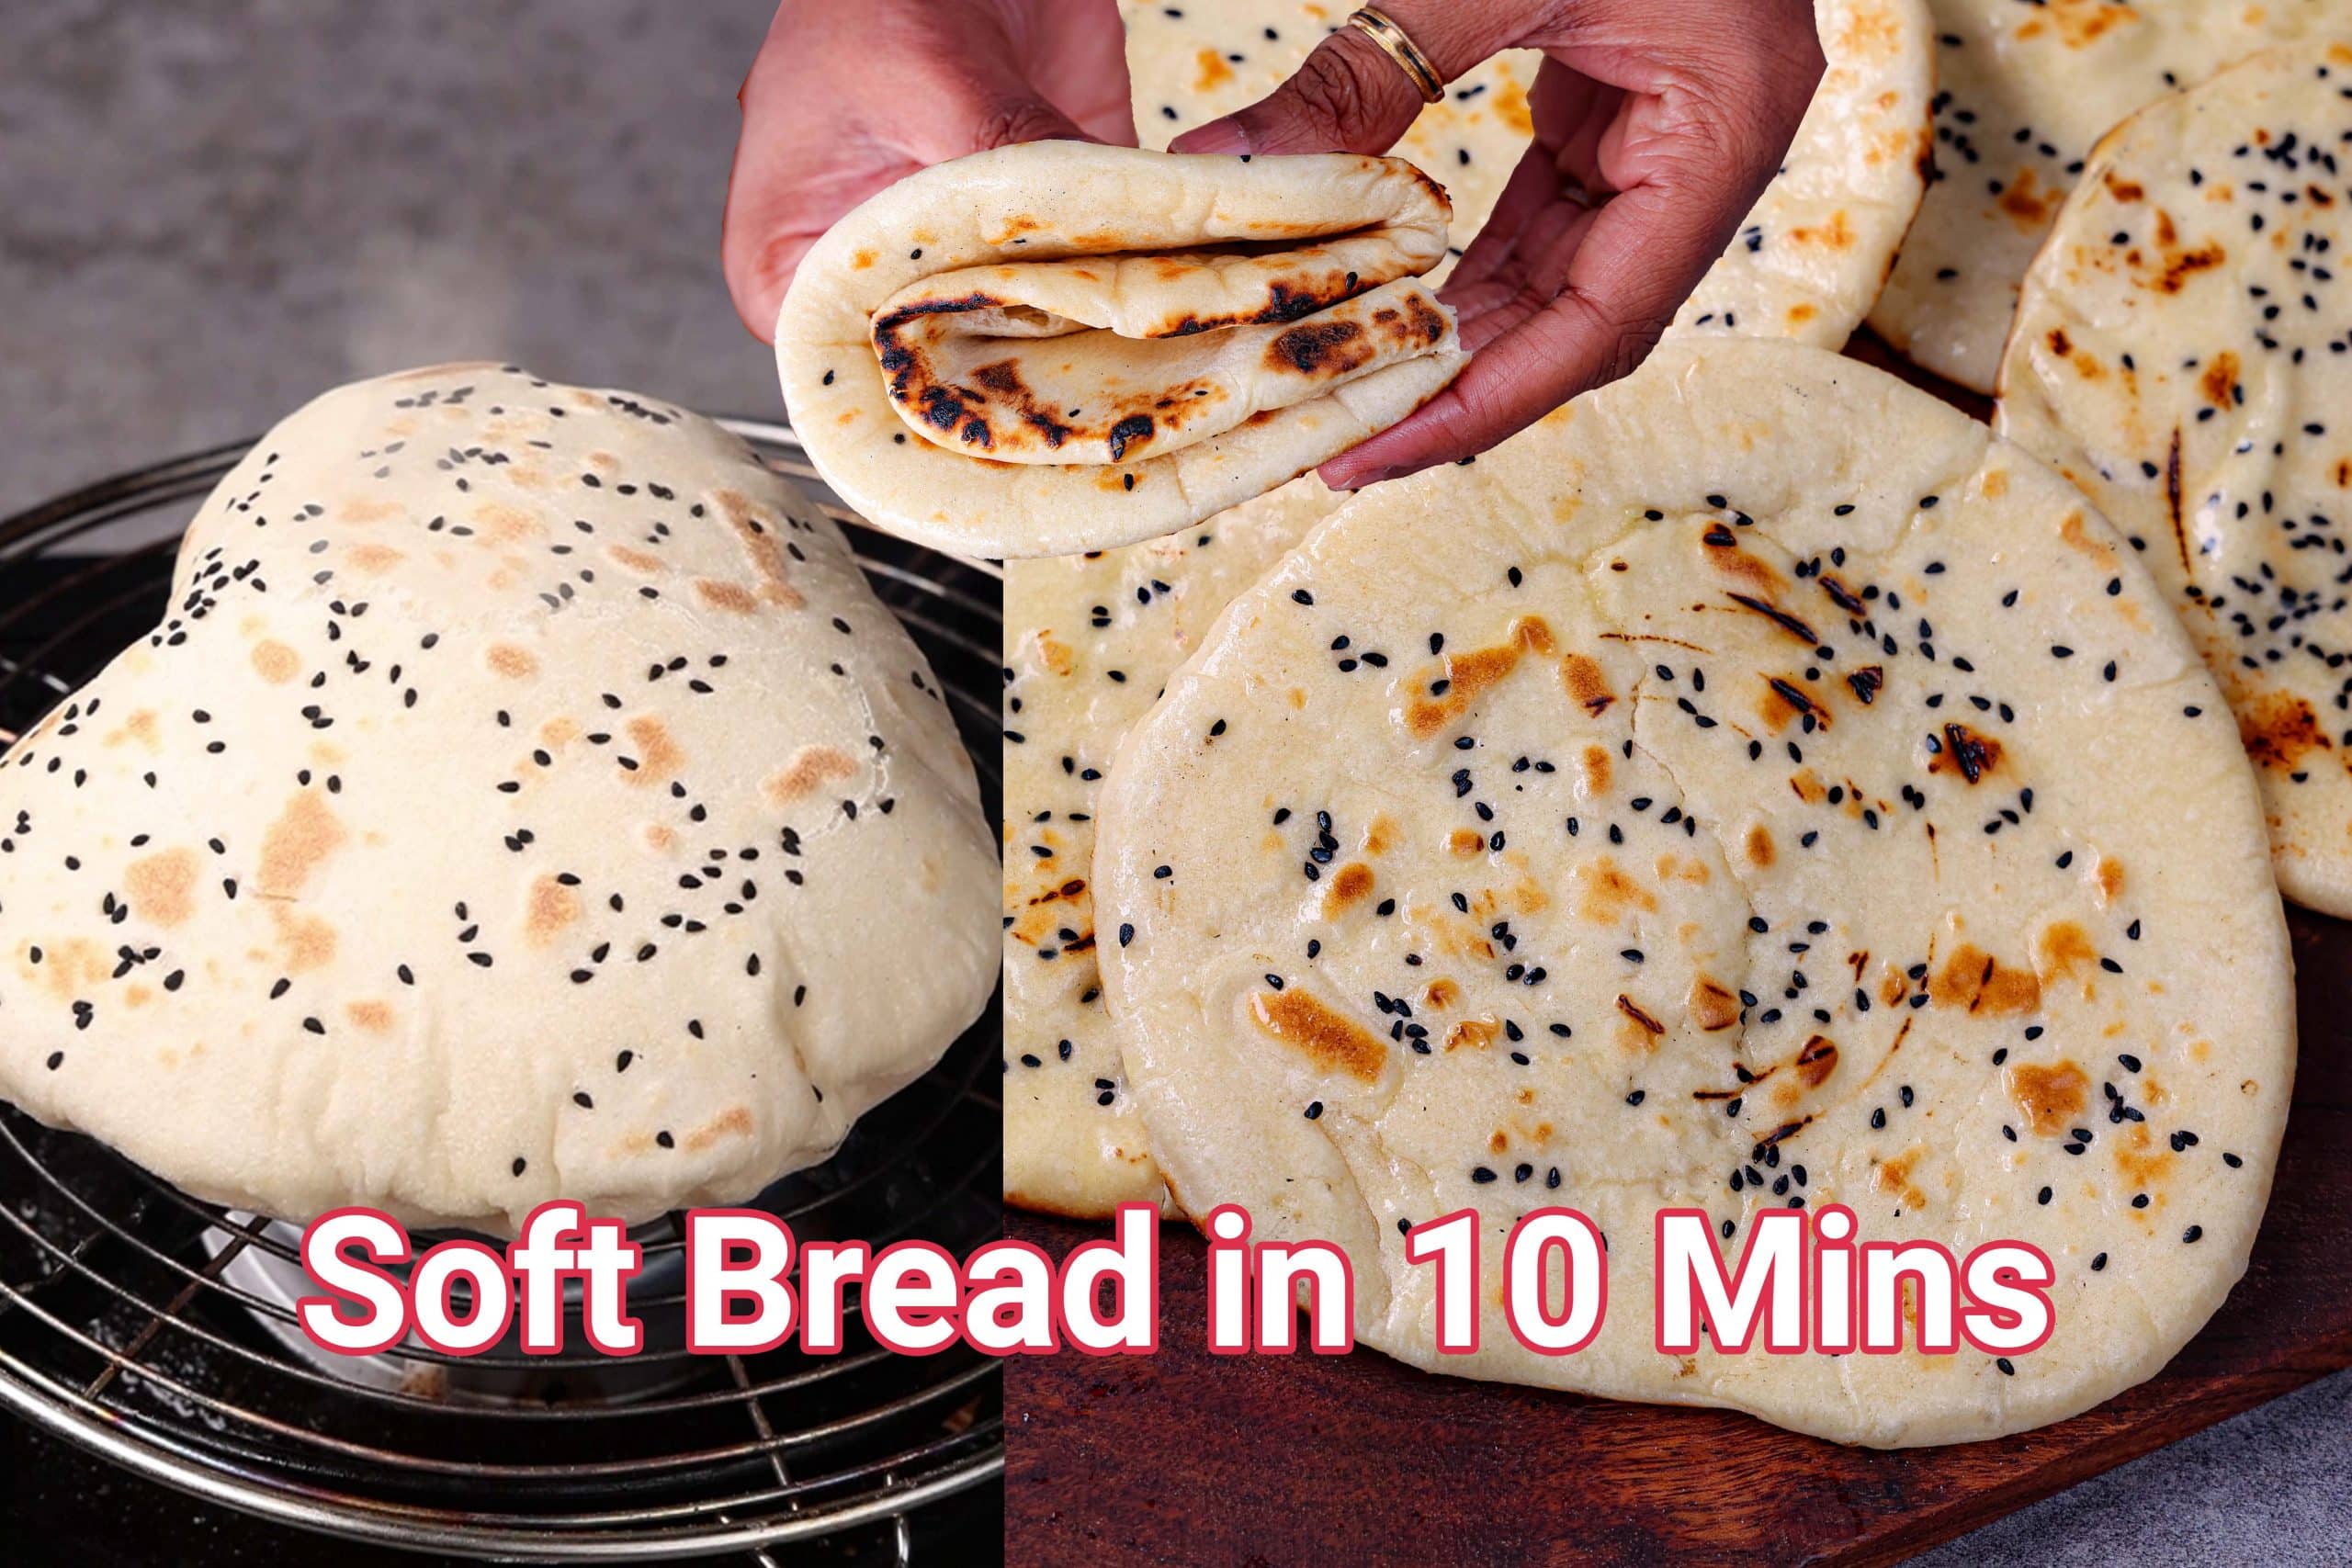 How to Make Bread at Home Without an Oven